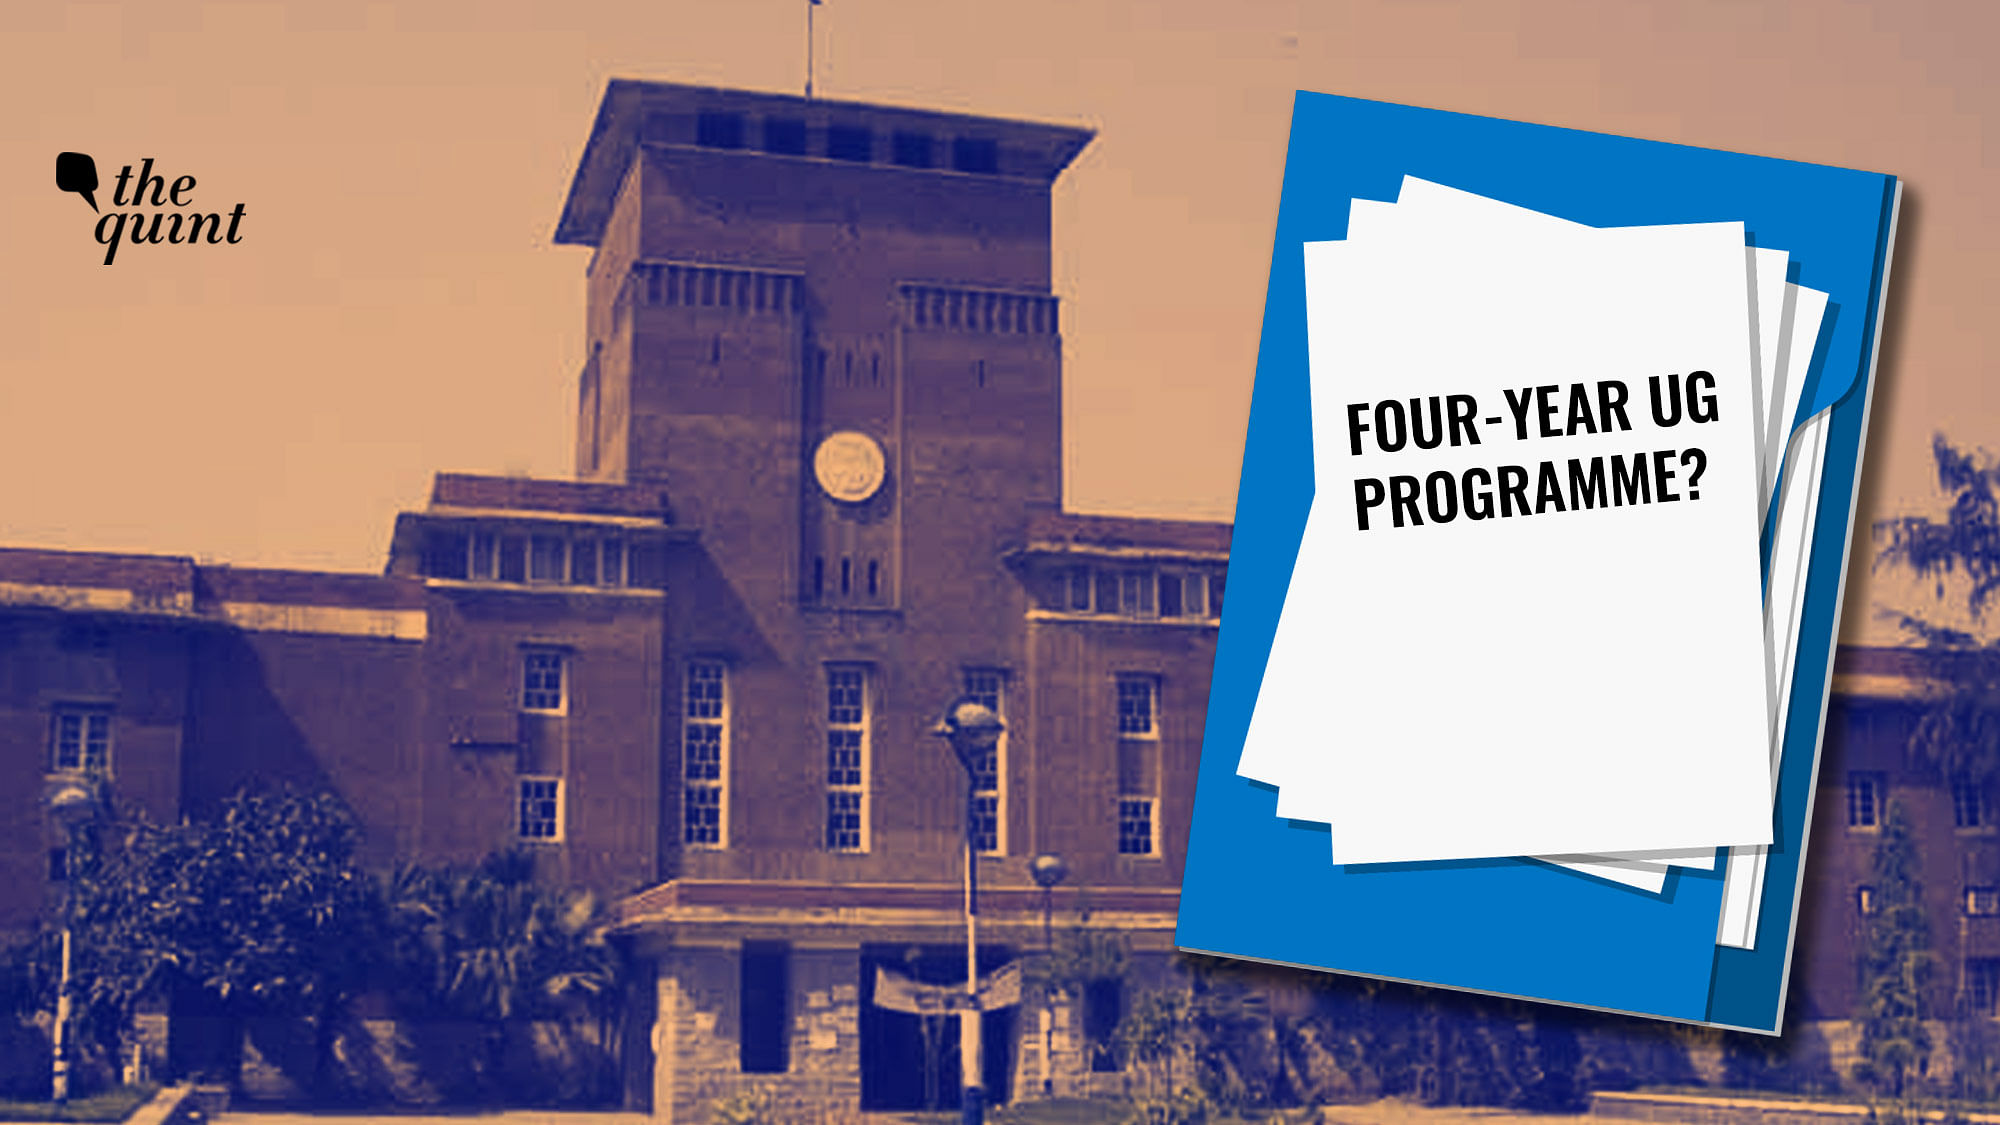 Delhi University 4 Years UG Courses:&nbsp;Delhi University’s committee on NEP has been discussing a proposal to reintroduce four-year UG programmes from 2021.